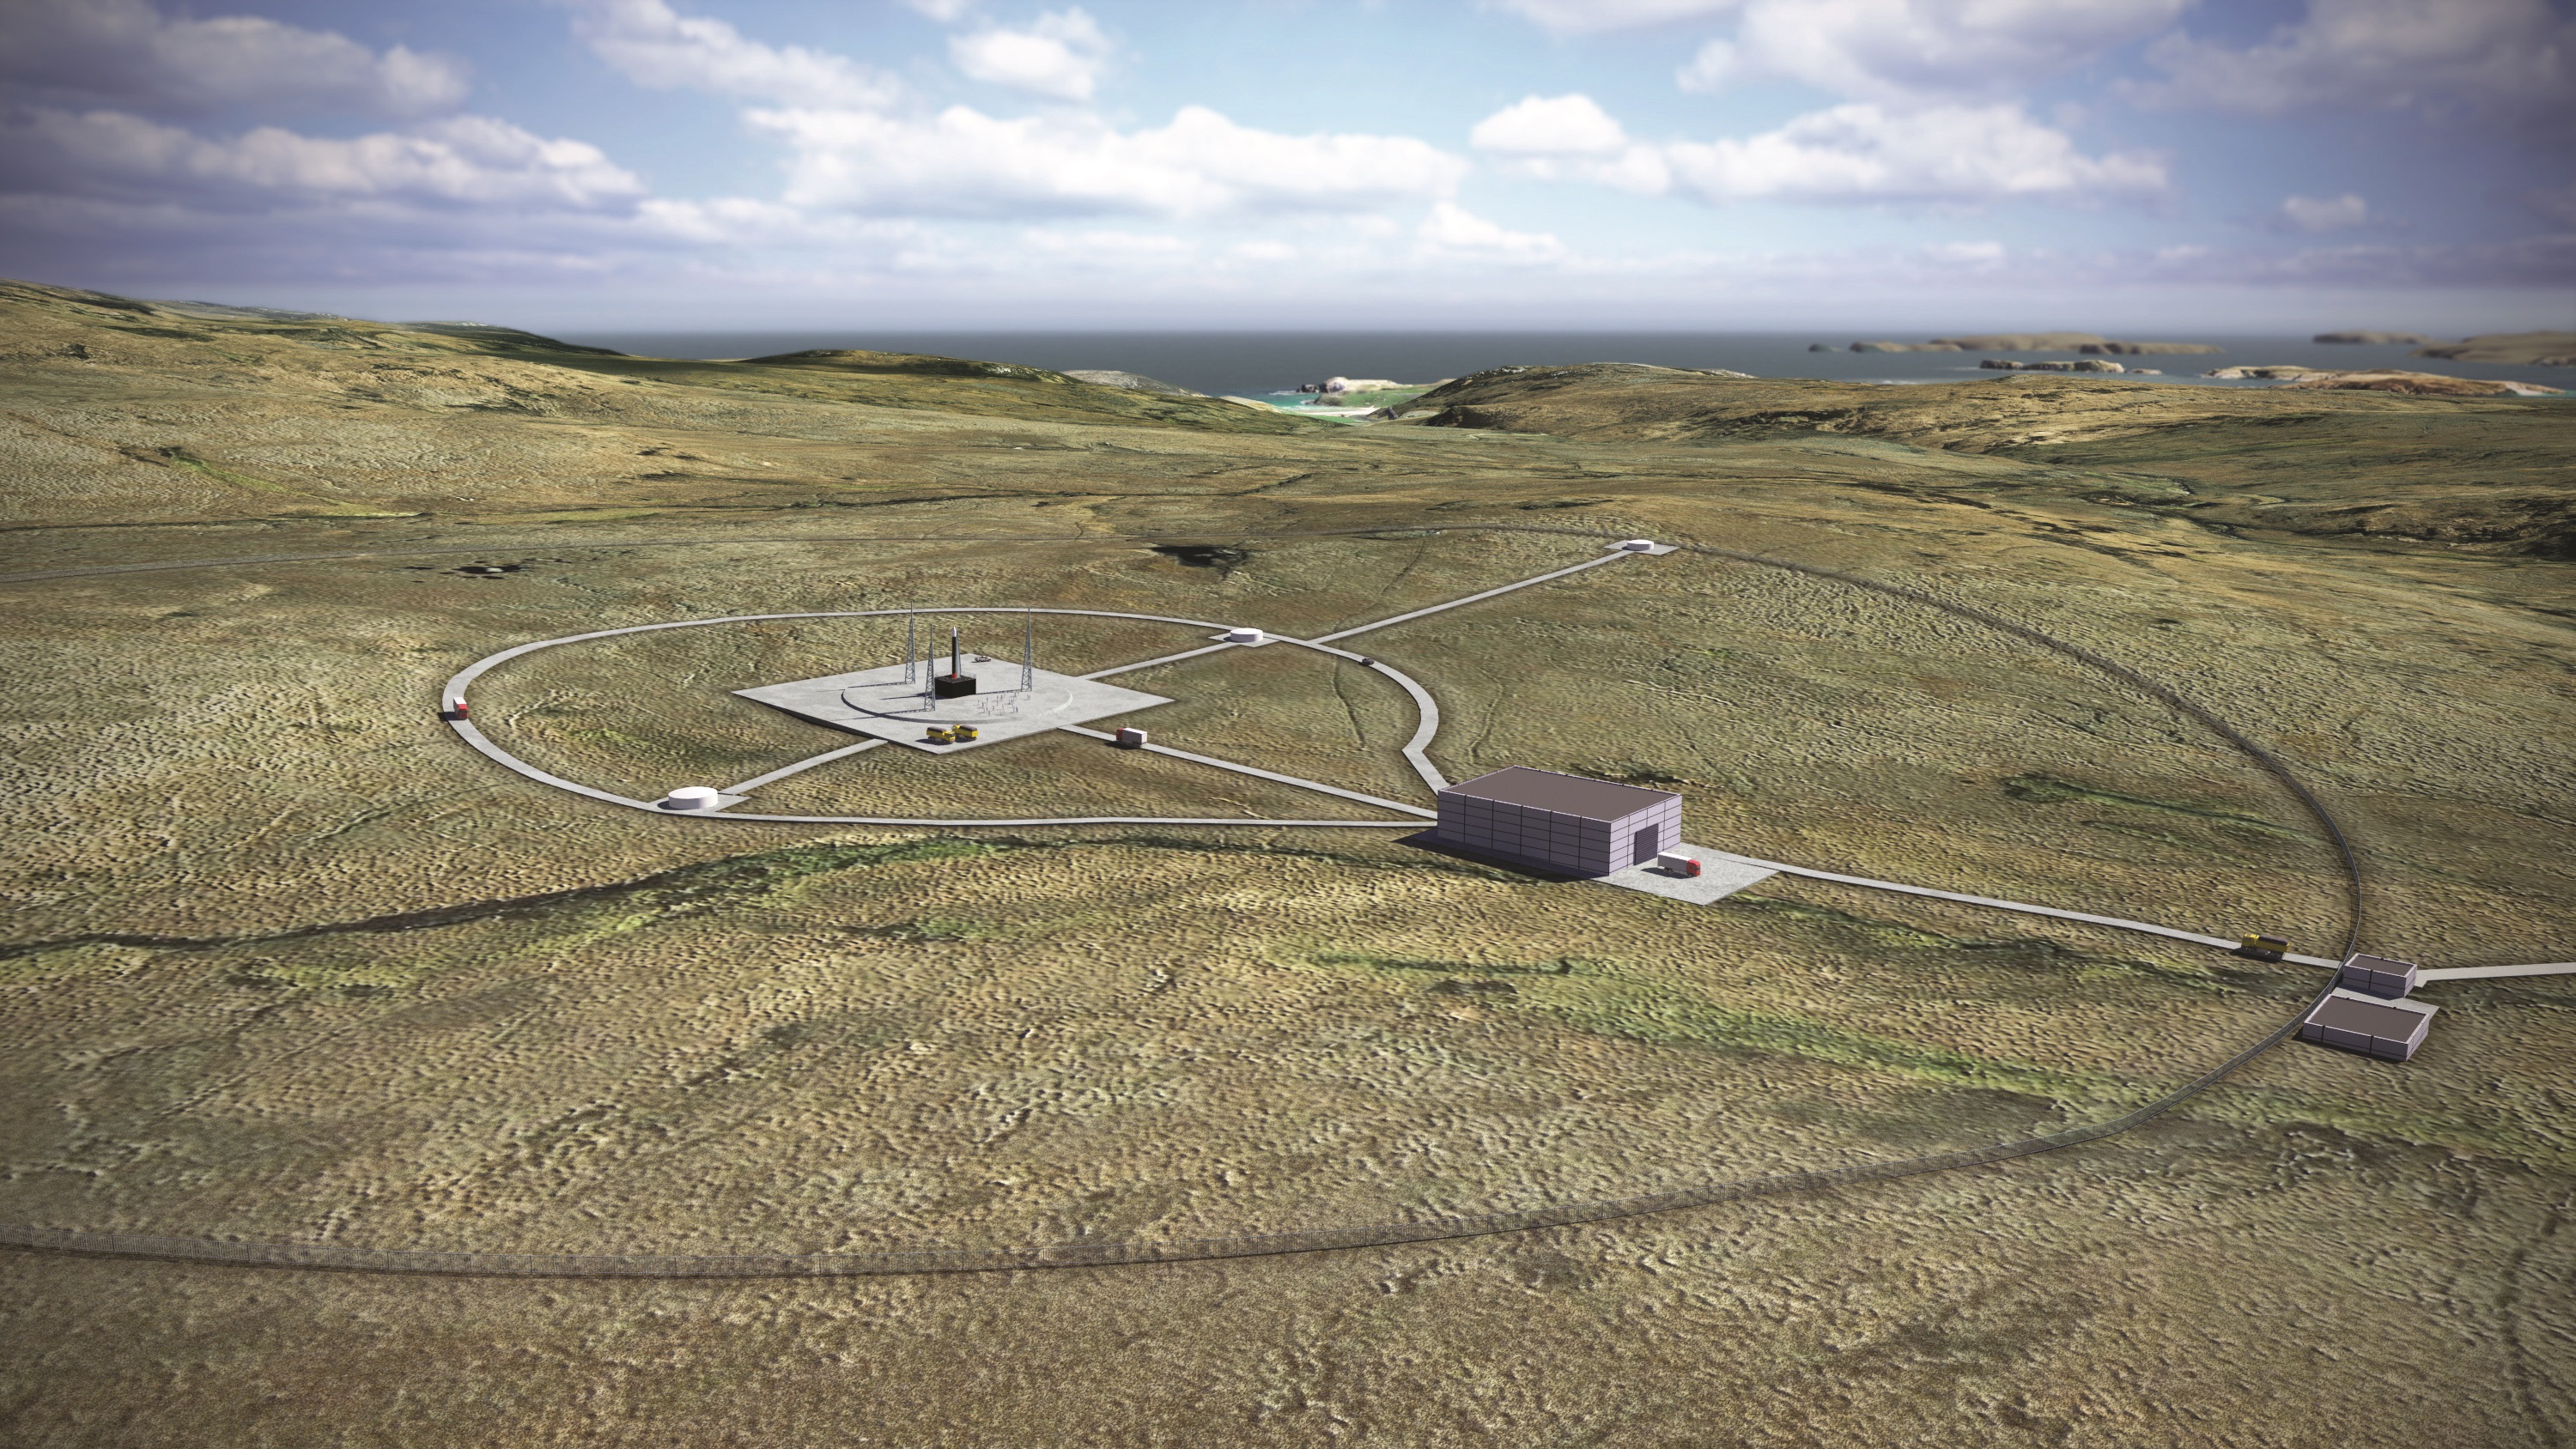 Sutherland spaceport design contract awarded